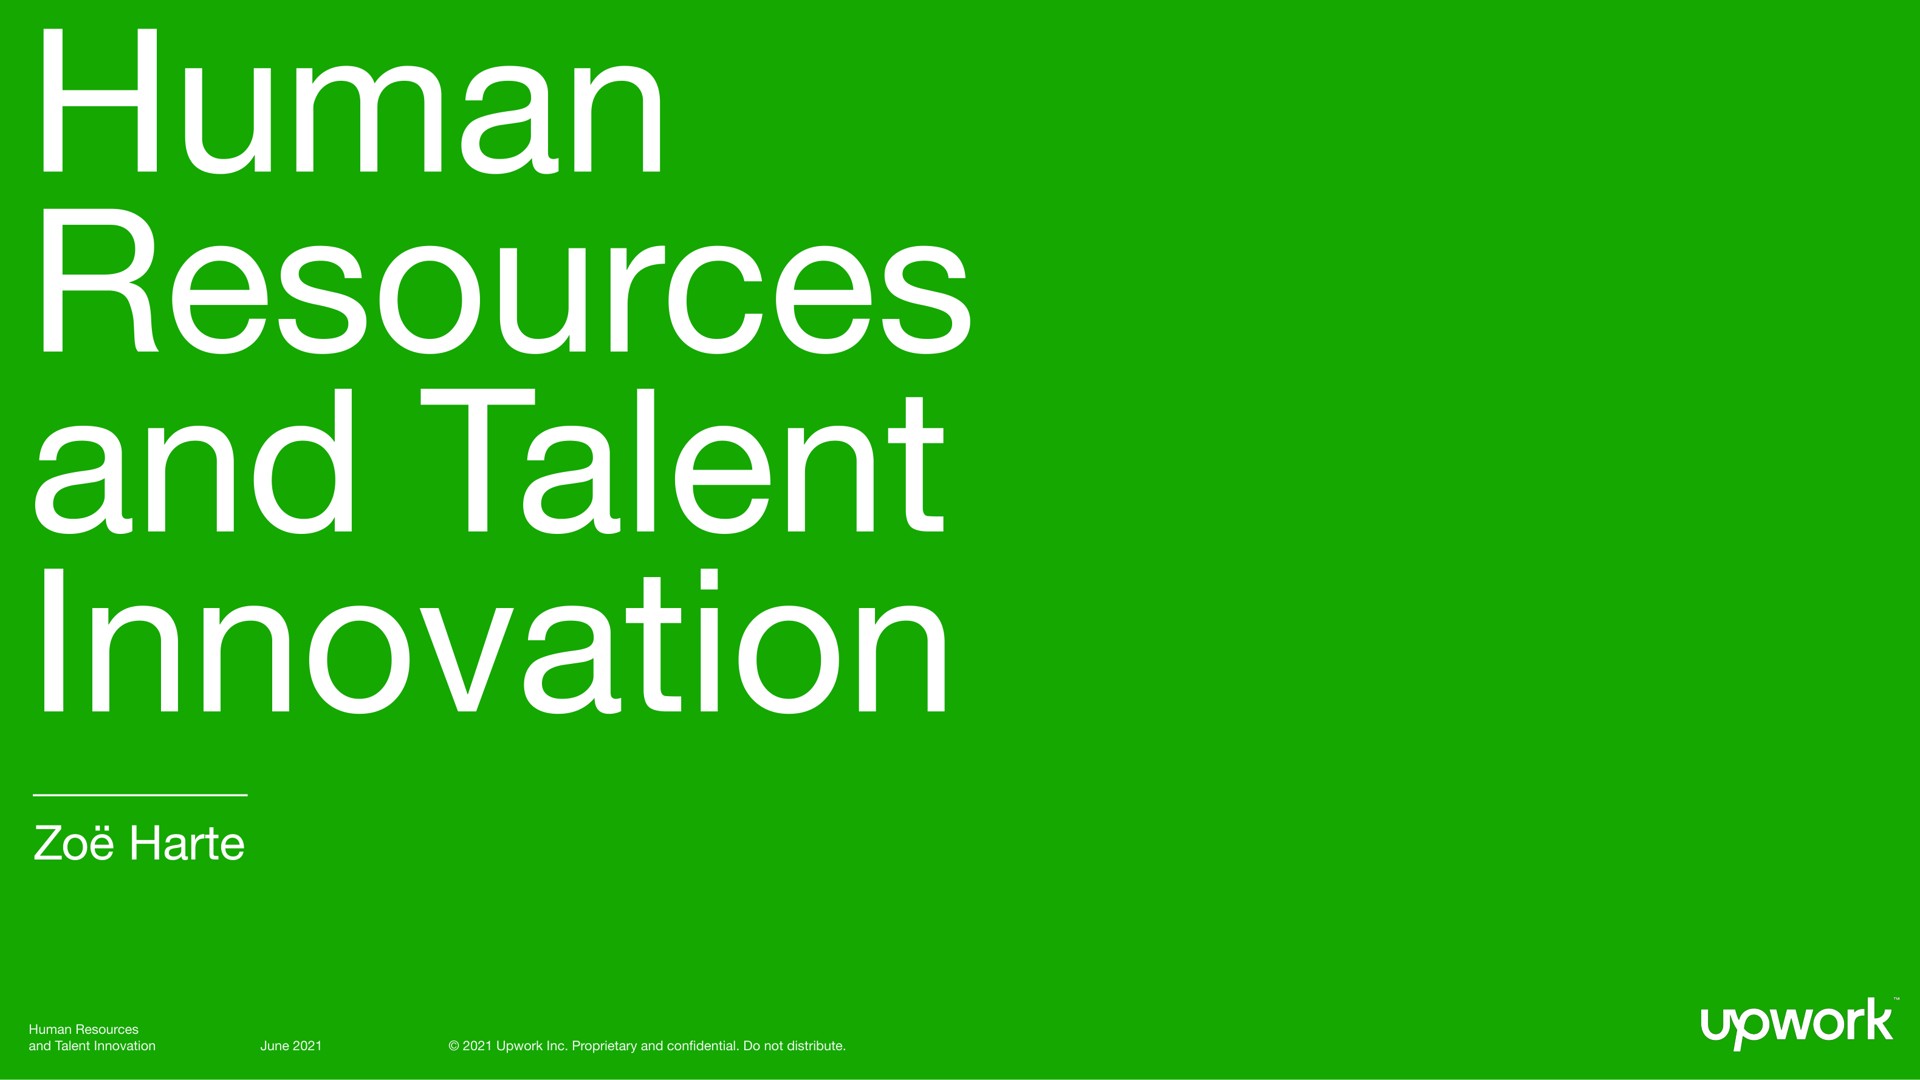 human resources and talent innovation | Upwork